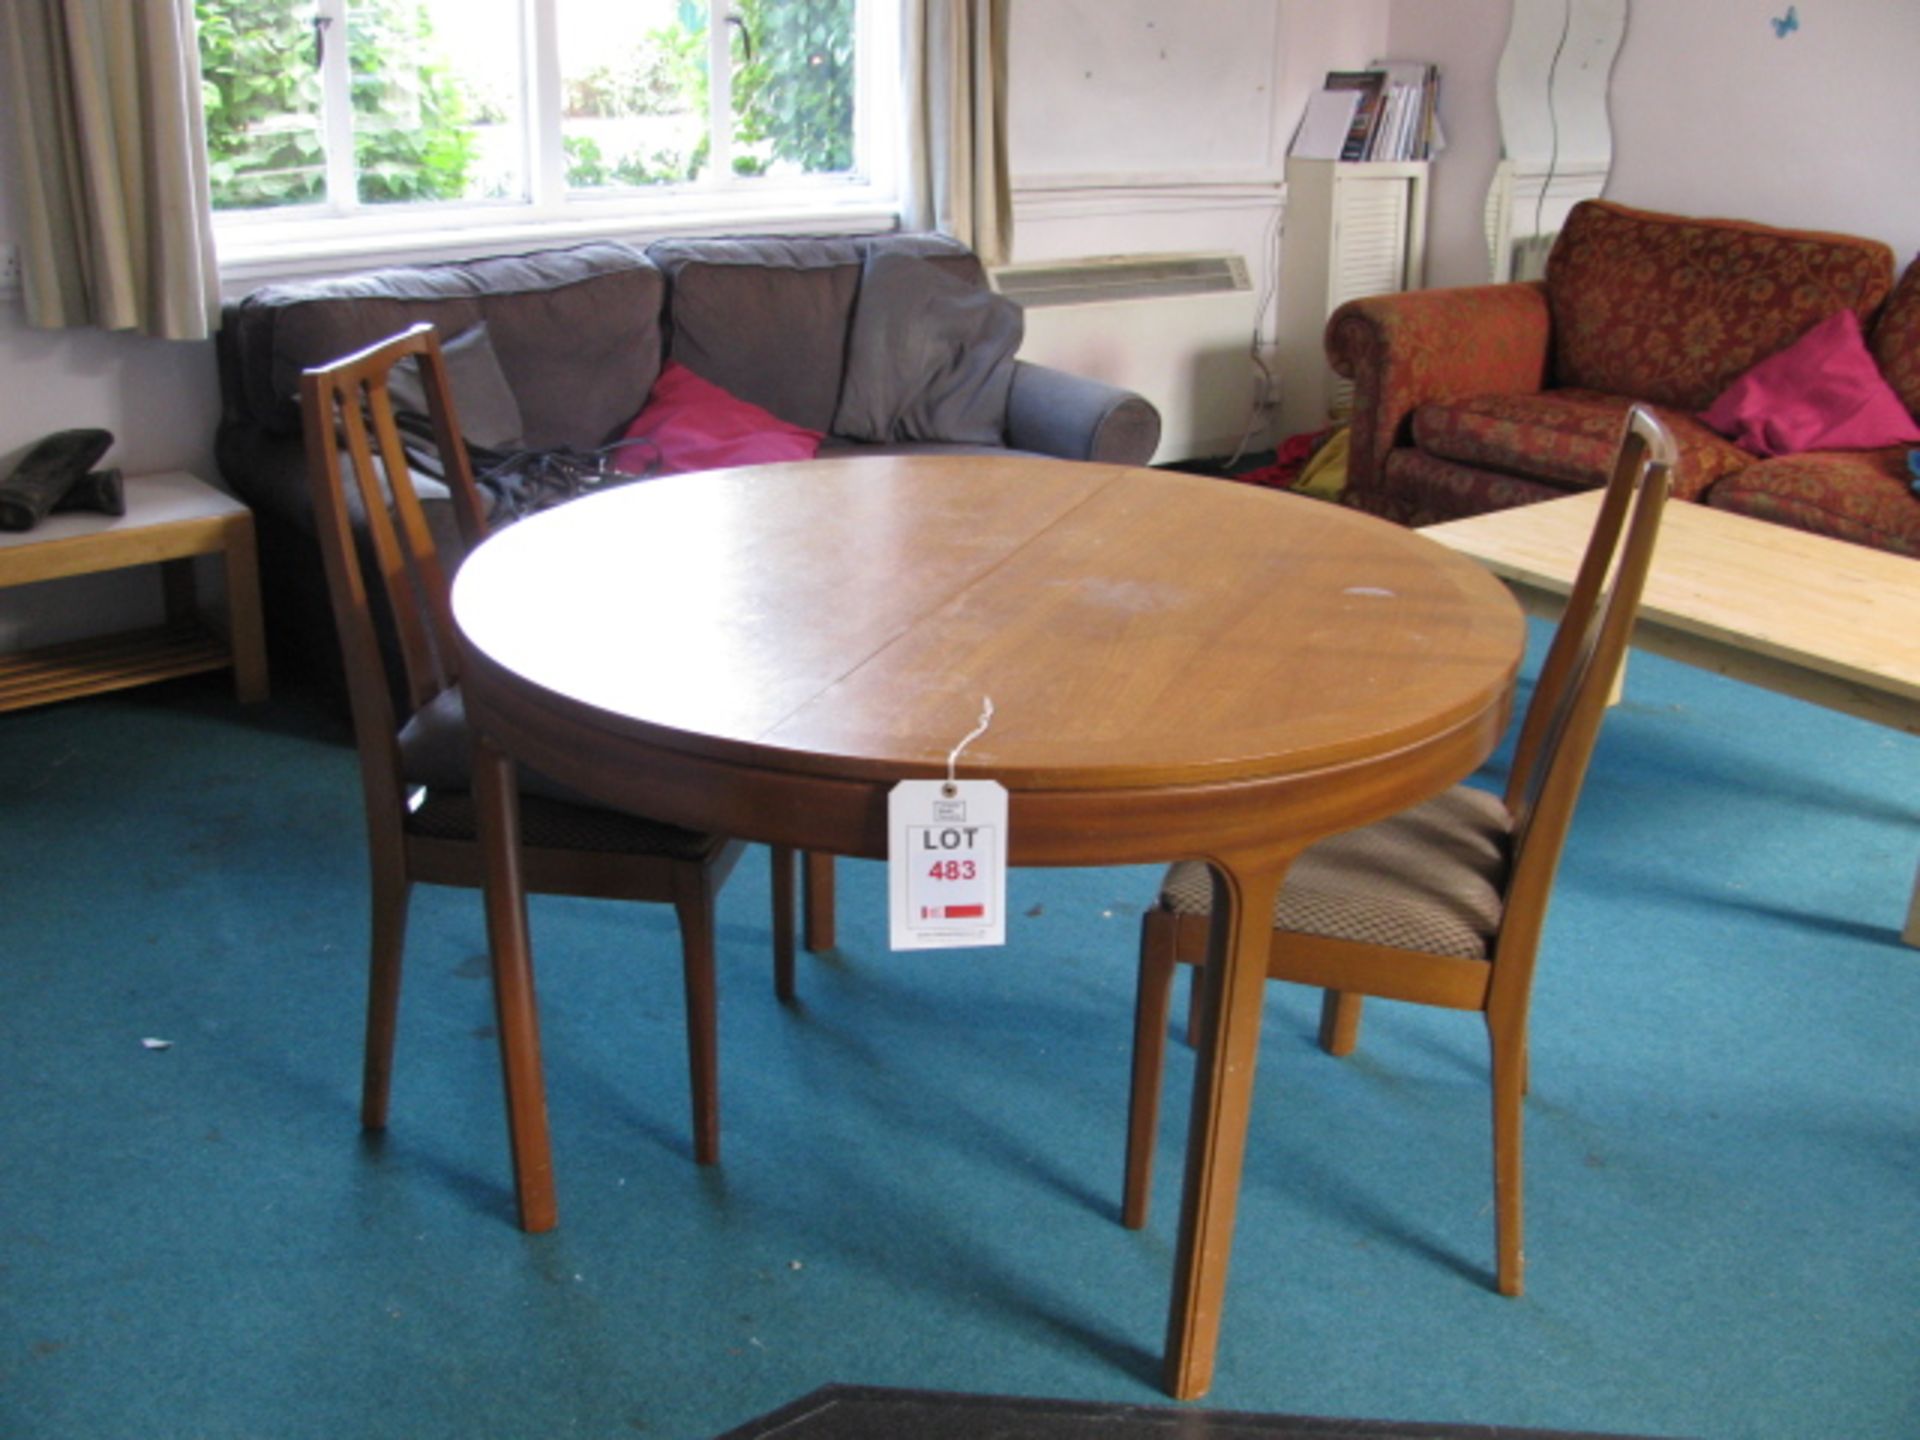 Remaining Contents of room to include: round wooden dining table, three various sofas, coffee table,